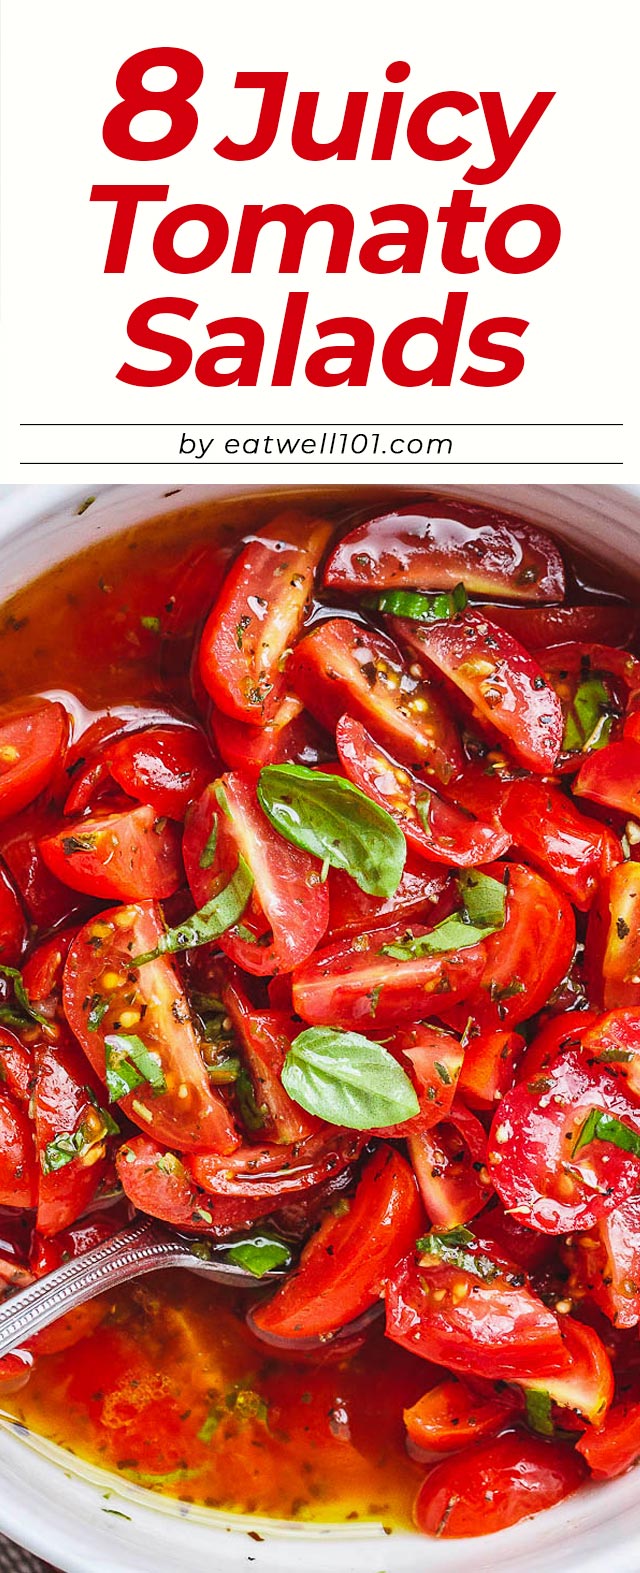 Tomato Salad Recipes - #tomato #salad #recipes #eatwell101 - These tomato salad recipes are the easiest and most delicious things to do on earth!